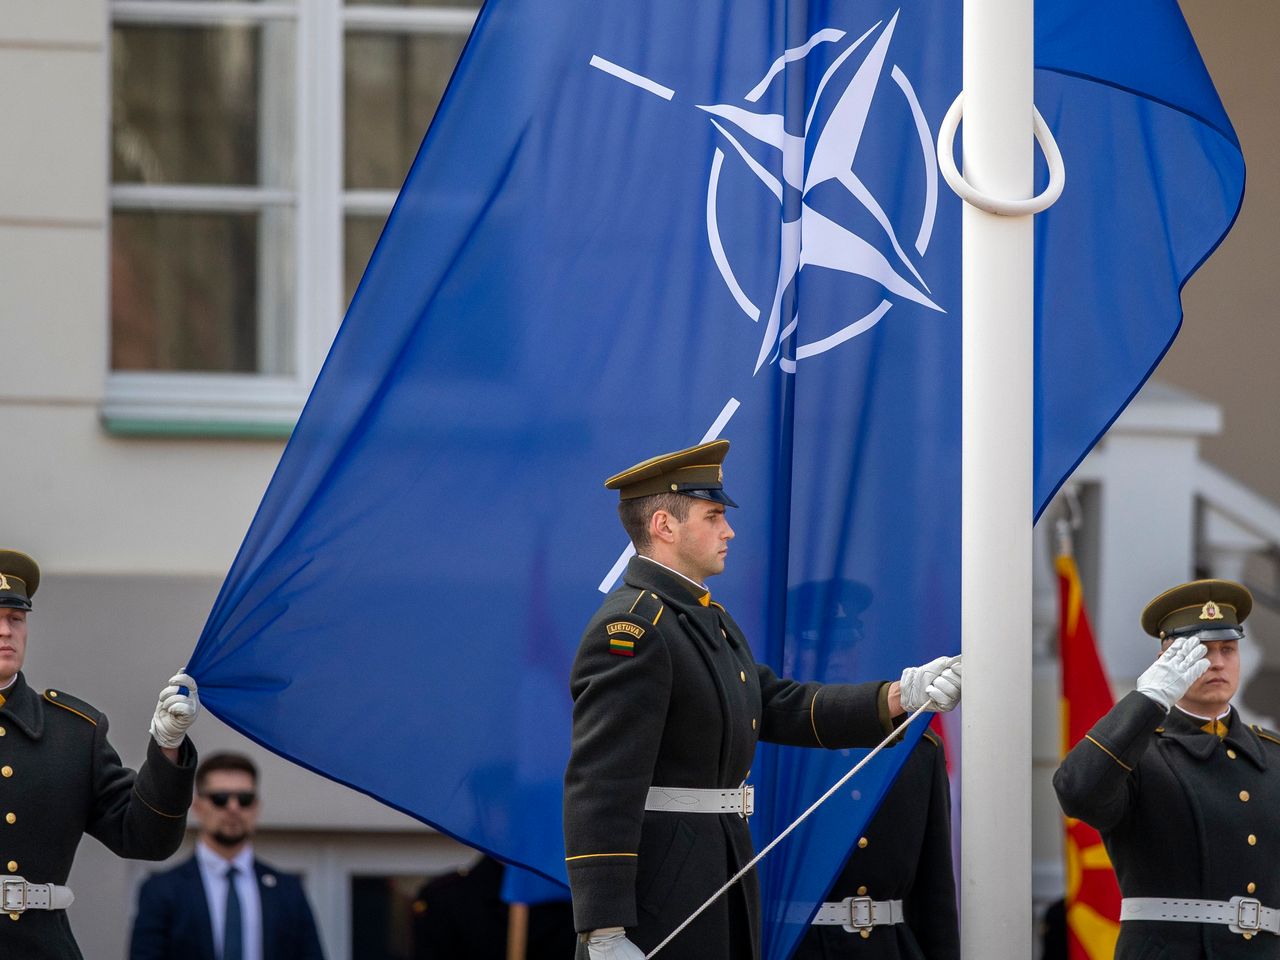 75 years of NATO: The history of the military alliance